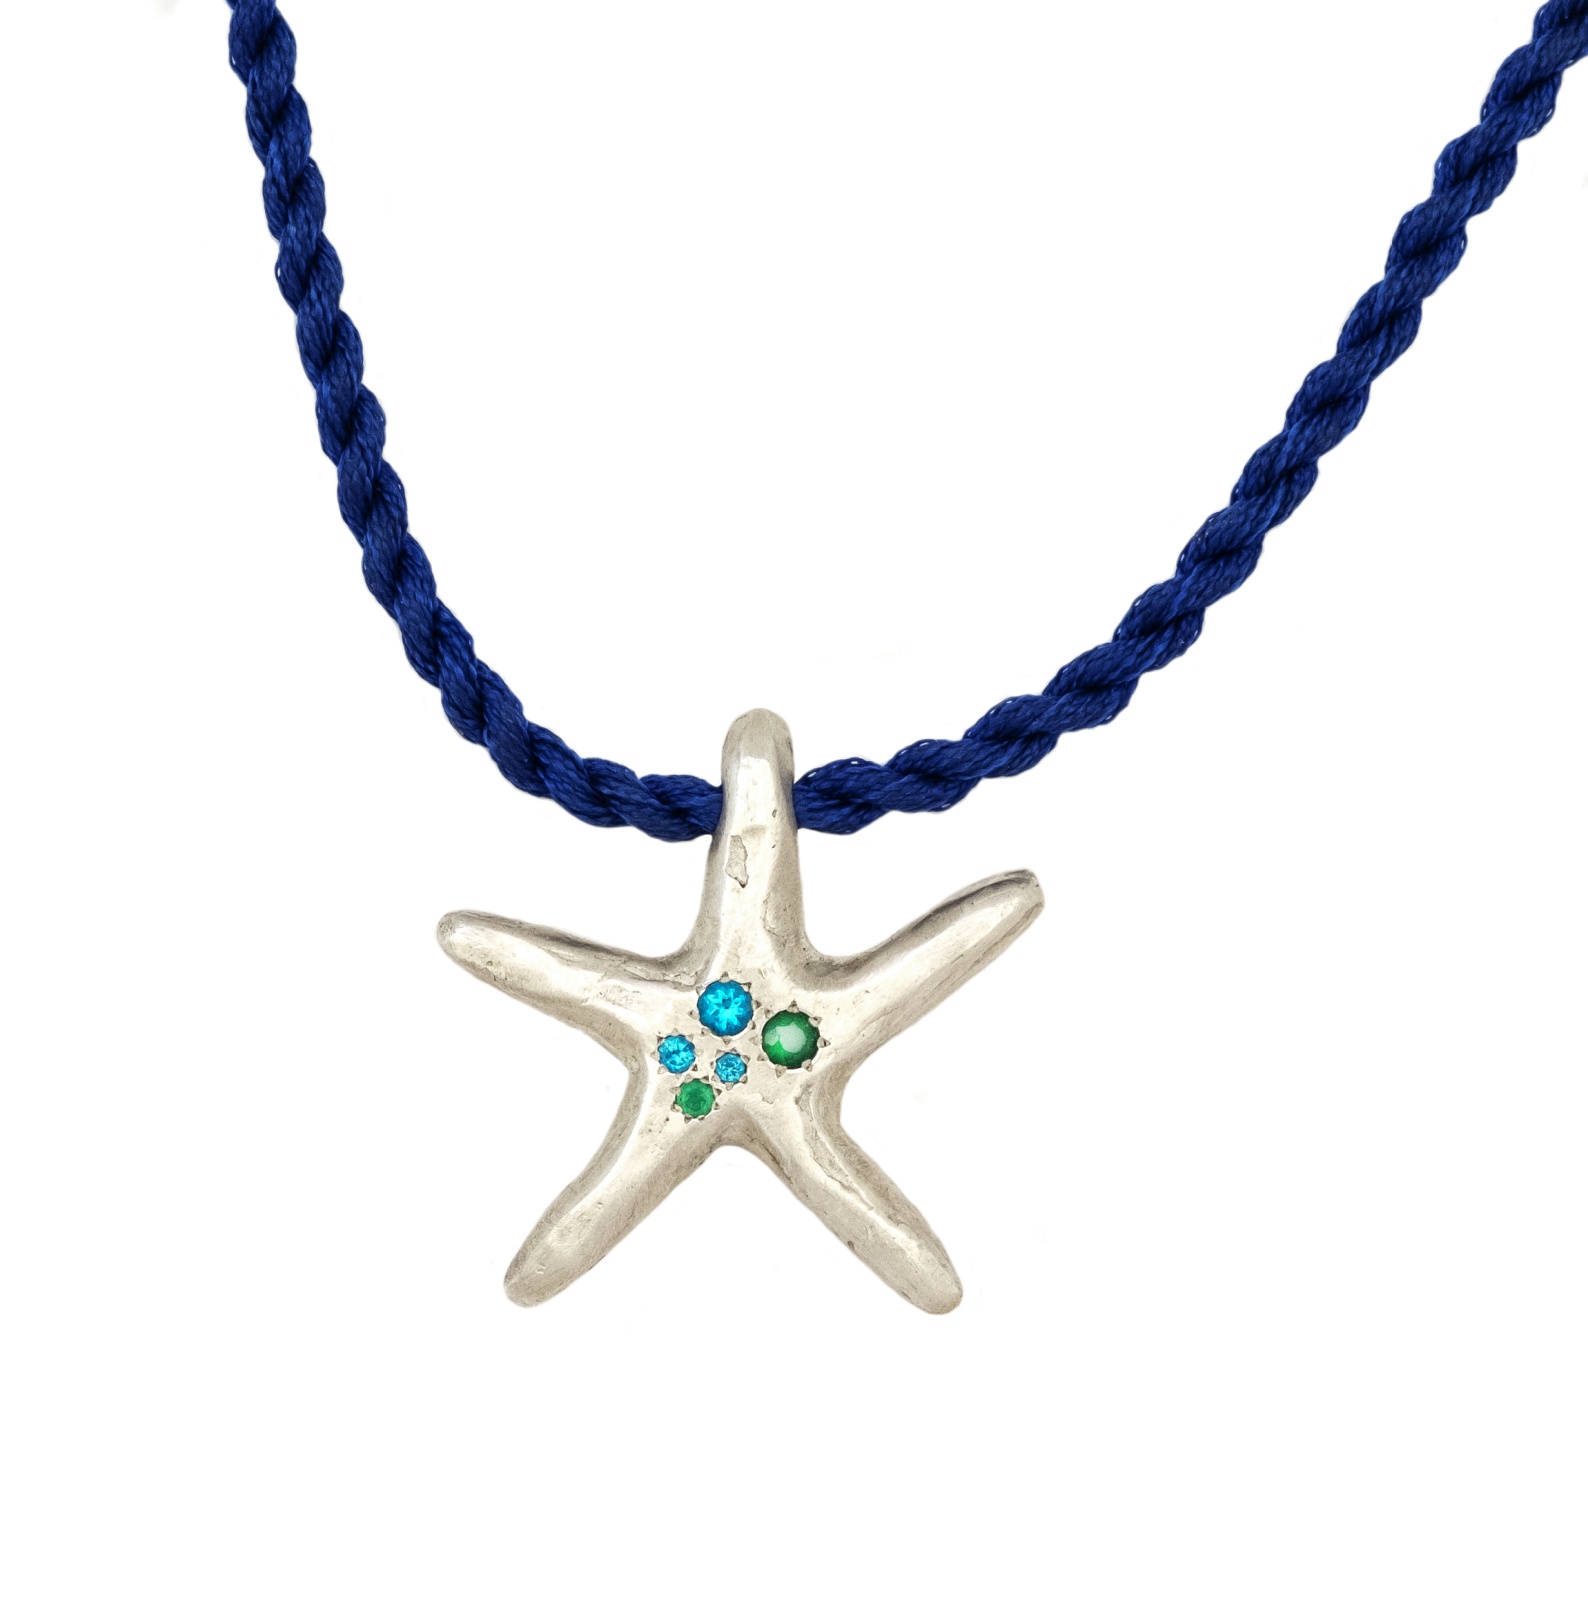 Starfish - €259
Free Shipping

Details
Stones:Emeralds-Topazes
Bold 925 Sterling Silver
High Polished Finish
Nickel-free
Handmade
Engraved with Patrizia Casamirra Jewels Logo

